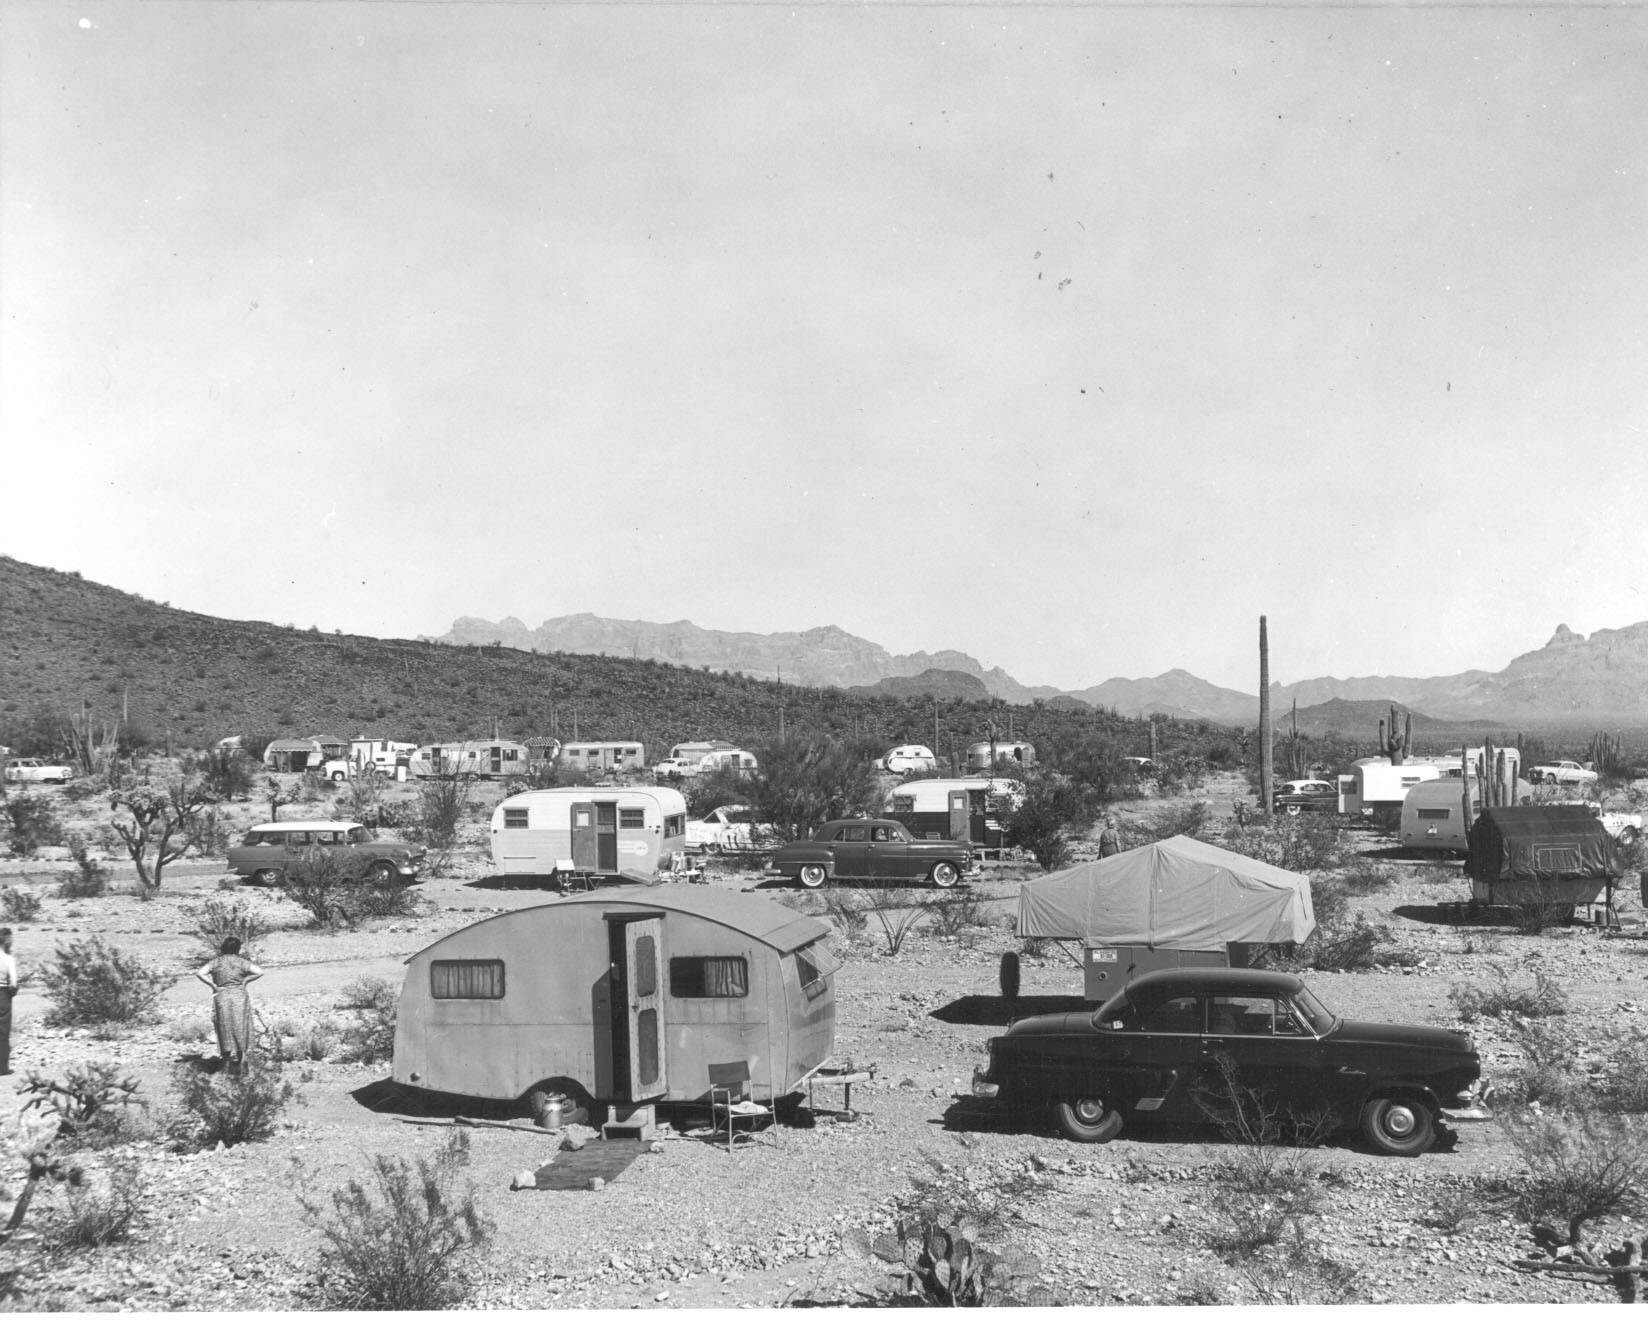 Cars, camping trailers, and pop-up campers are spaced across rocky, desert campground, scattered with desert vegetation. 